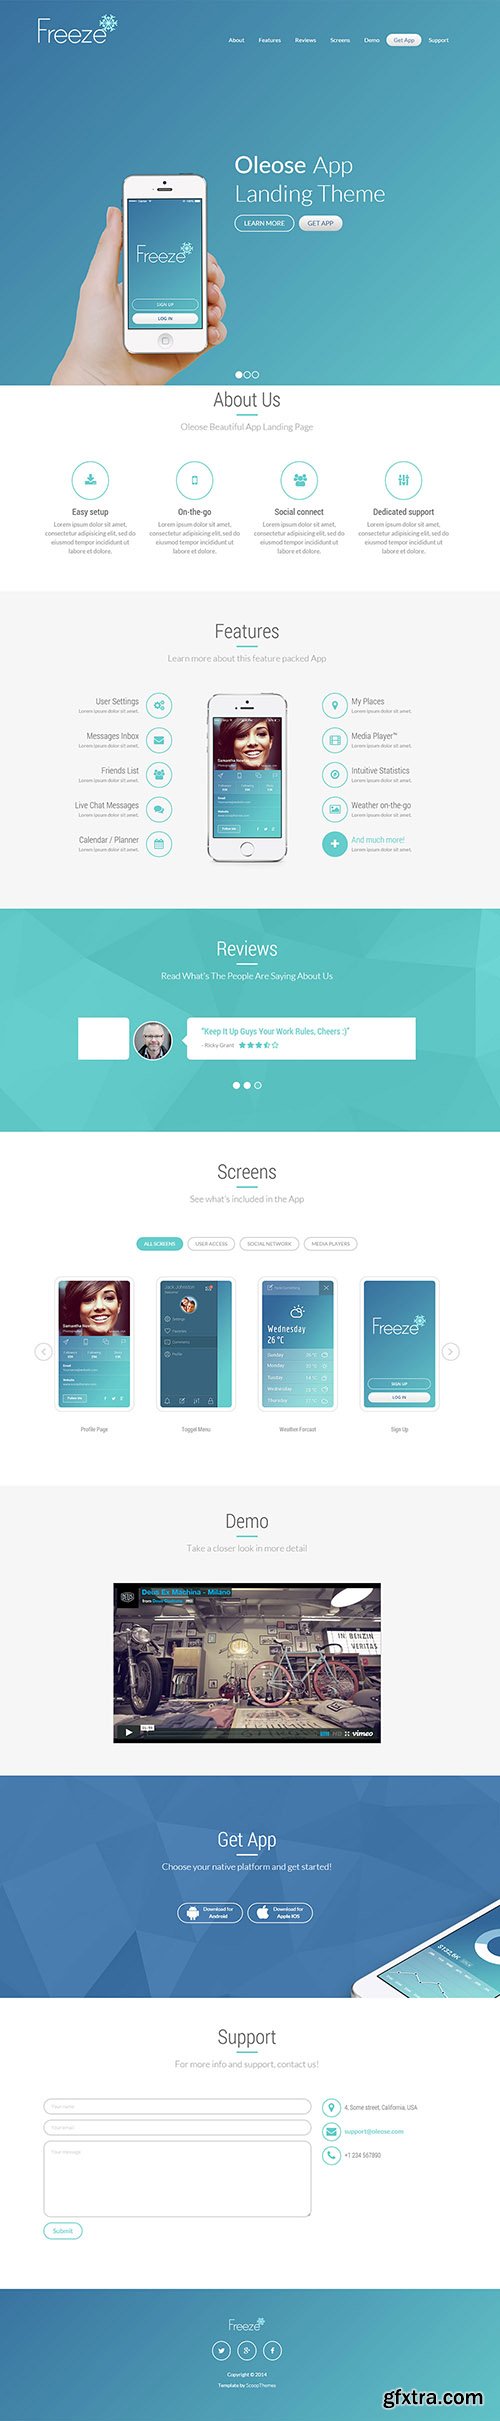 HTML Template - Oleose - App Bootstrap Landing Page